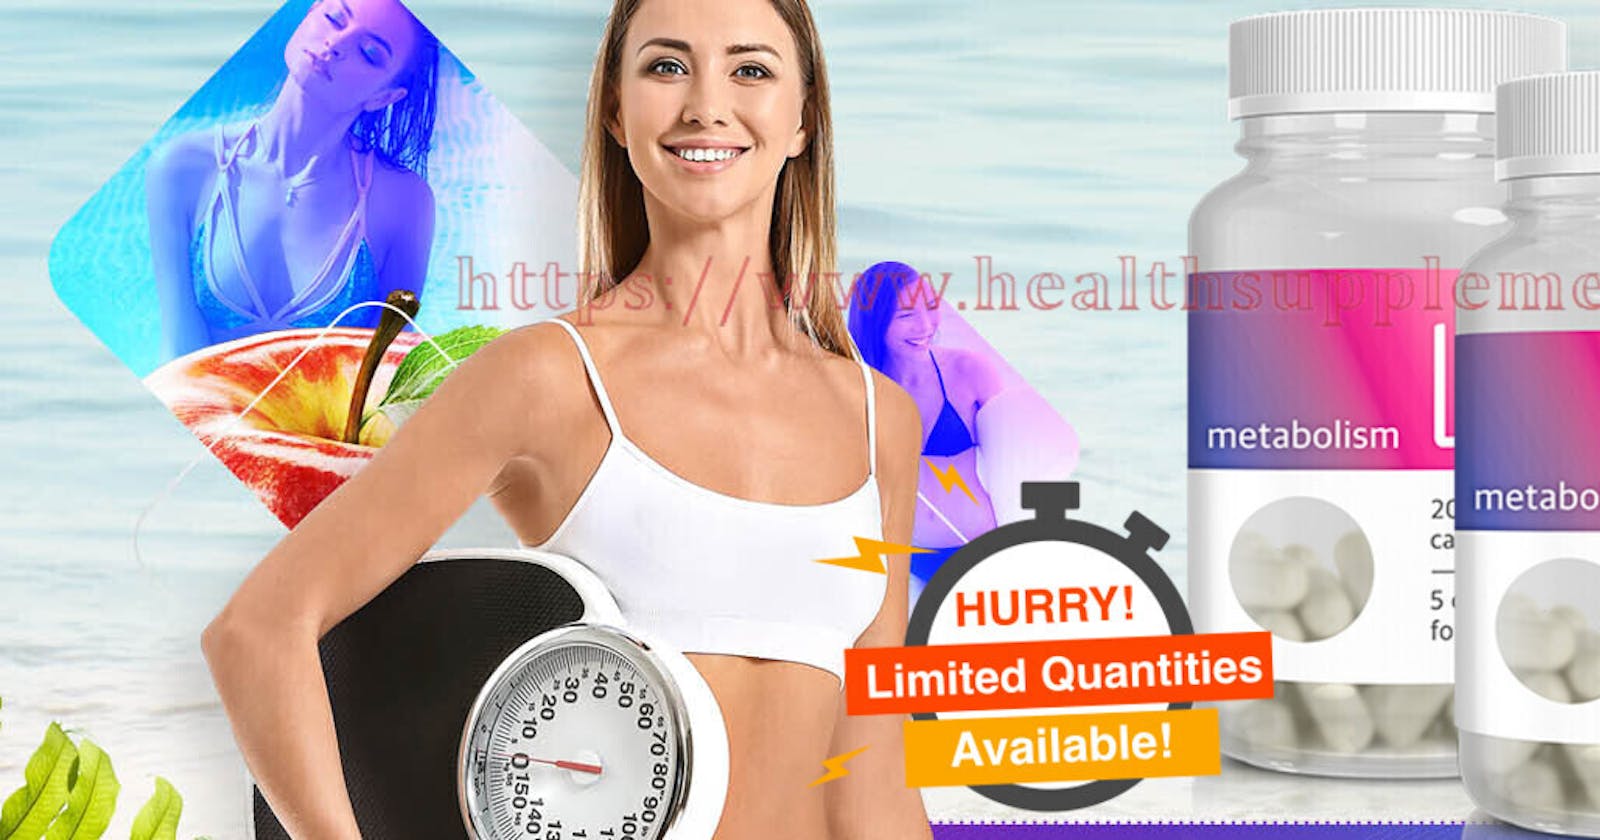 Liba Weight Loss Capsules [#1 Premium Dietary Supplement] To Achieve Weight And Fat Loss In Safe Way 2023 Report(Spam Or Legit)